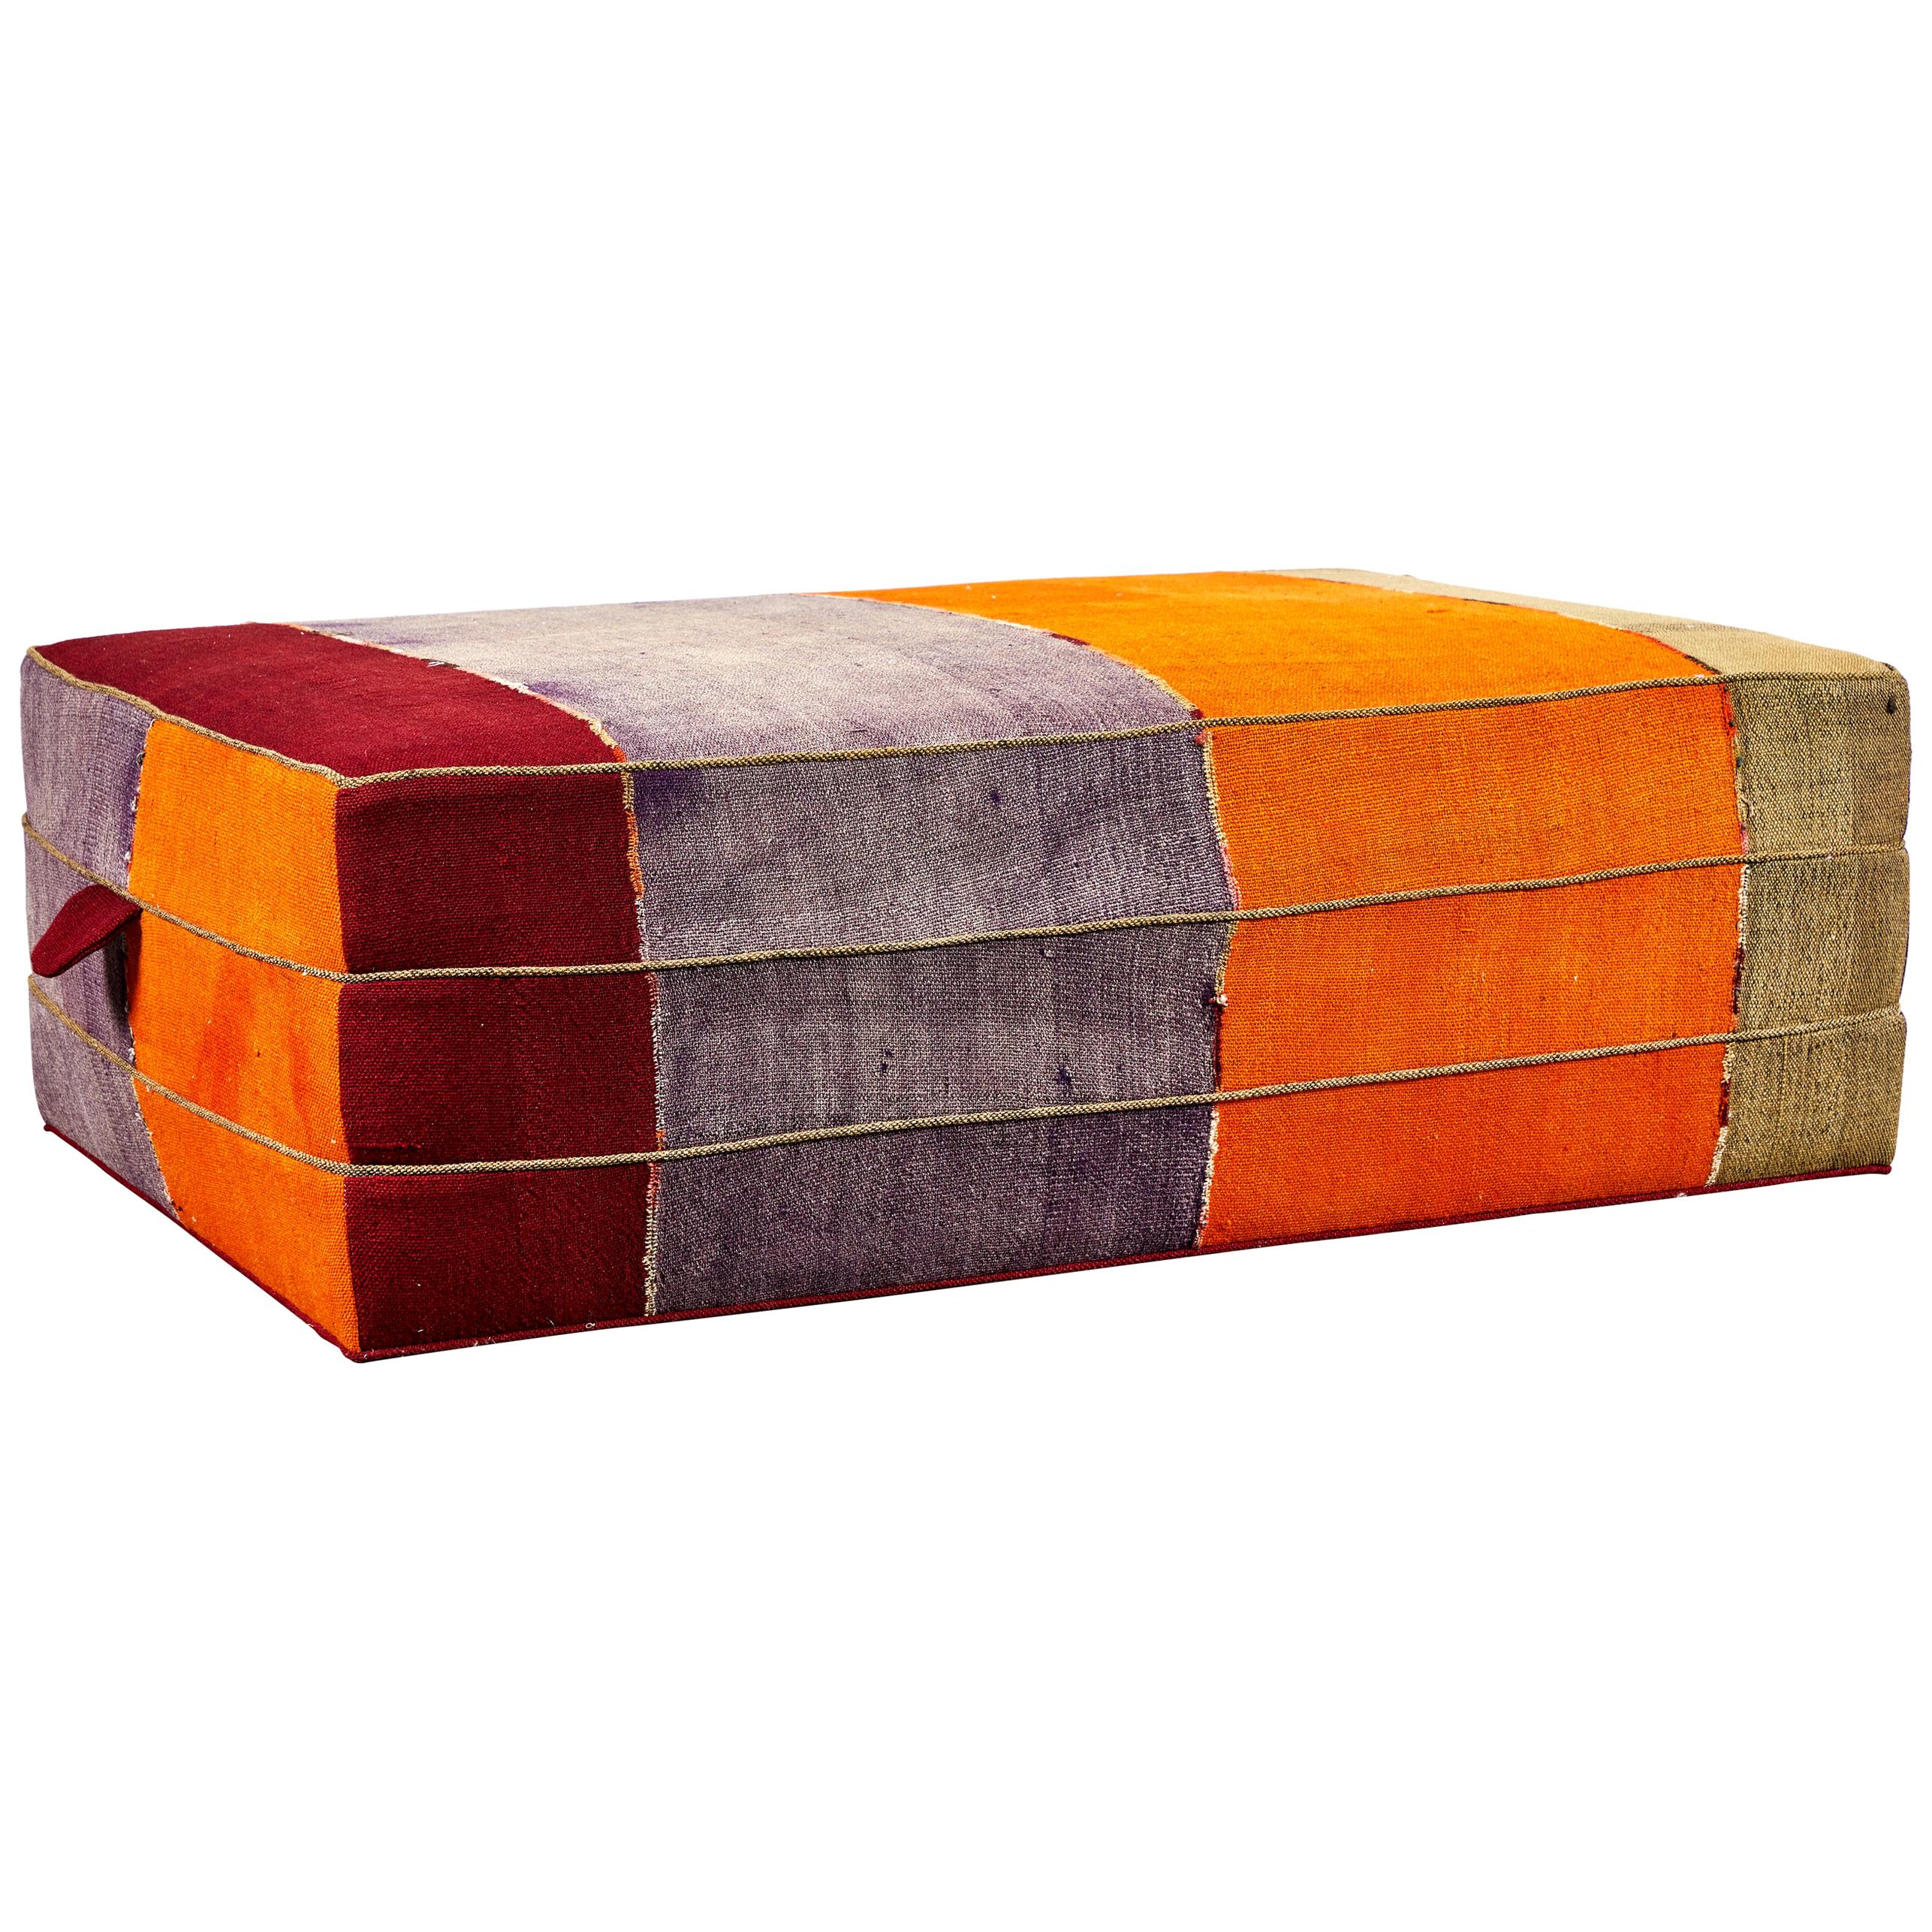 Nickey Kehoe Collection Rectangular Ottoman in Vintage Turkish Colorful Fabric